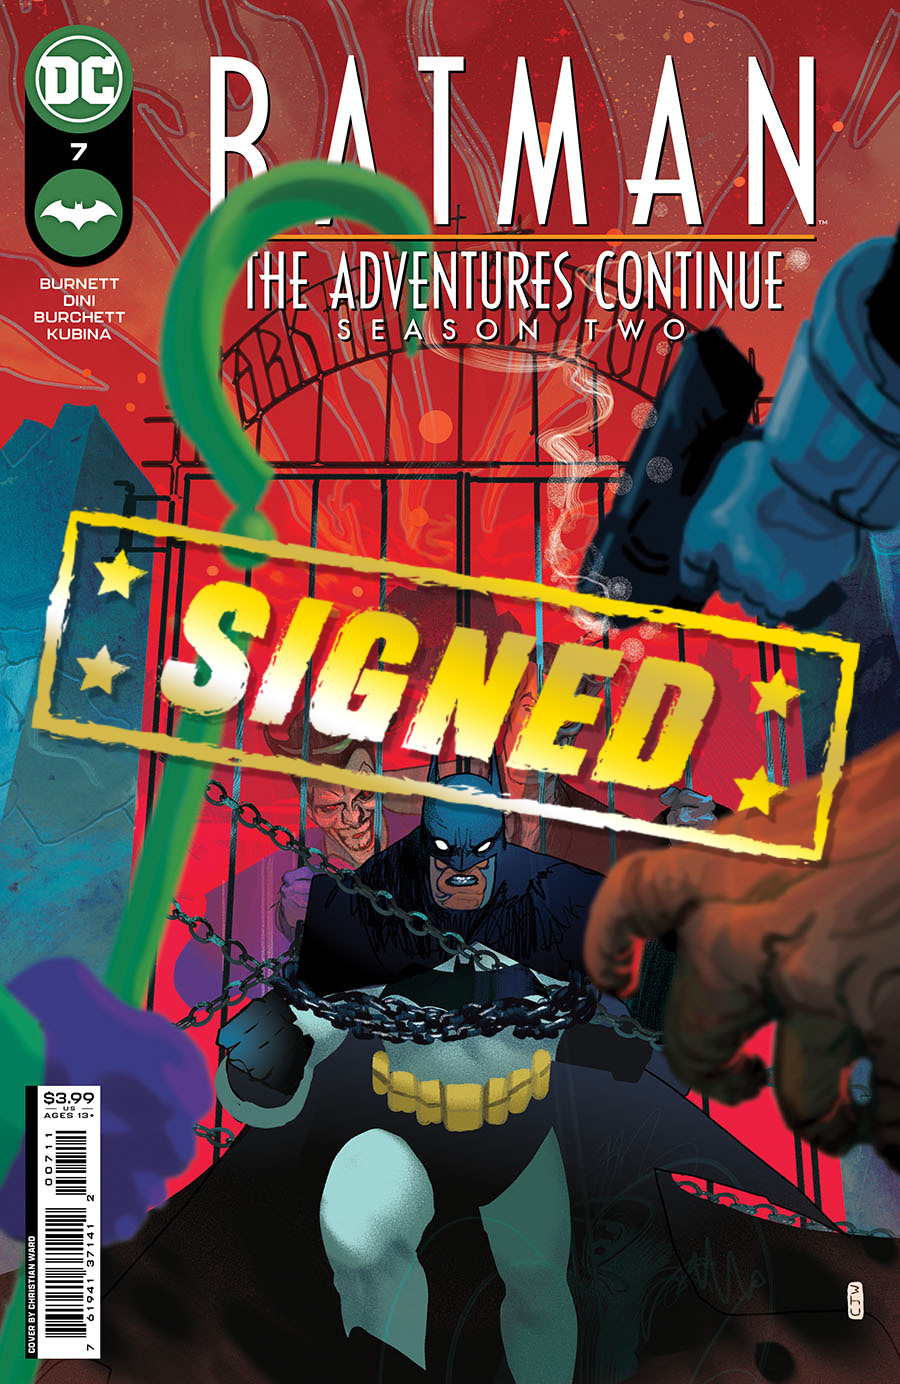 Batman The Adventures Continue Season II #7 Cover C Regular Christian Ward Cover Signed By Christian Ward